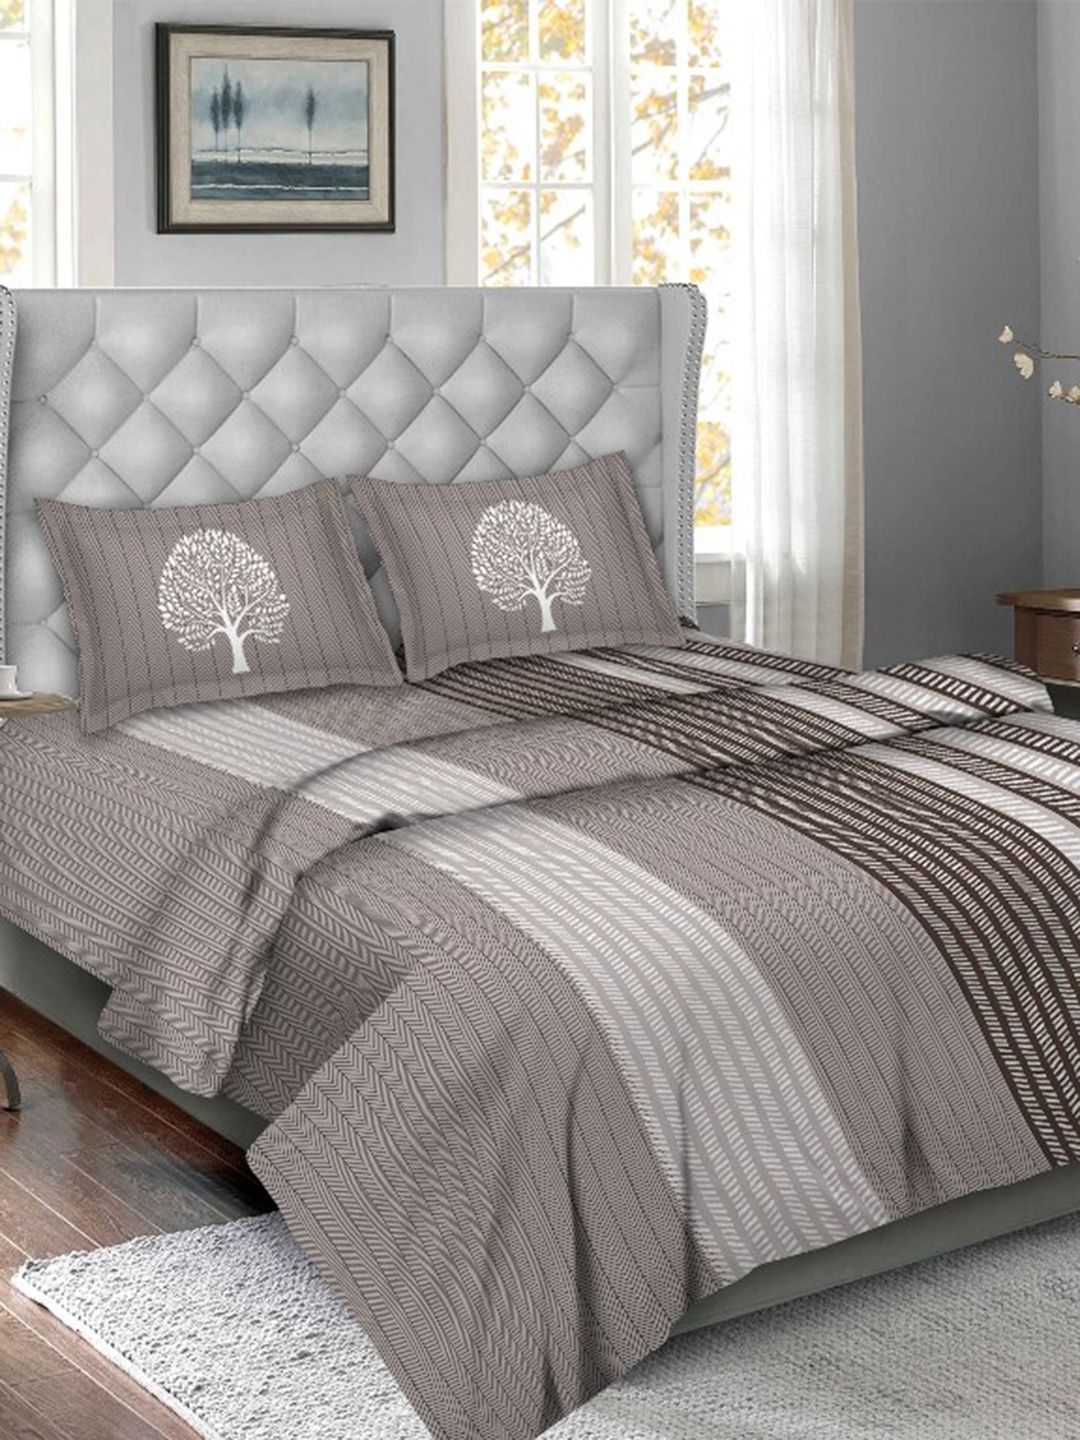 BELLA CASA Grey & White Geometric Printed Double Queen Bedding Set With Comforter Price in India